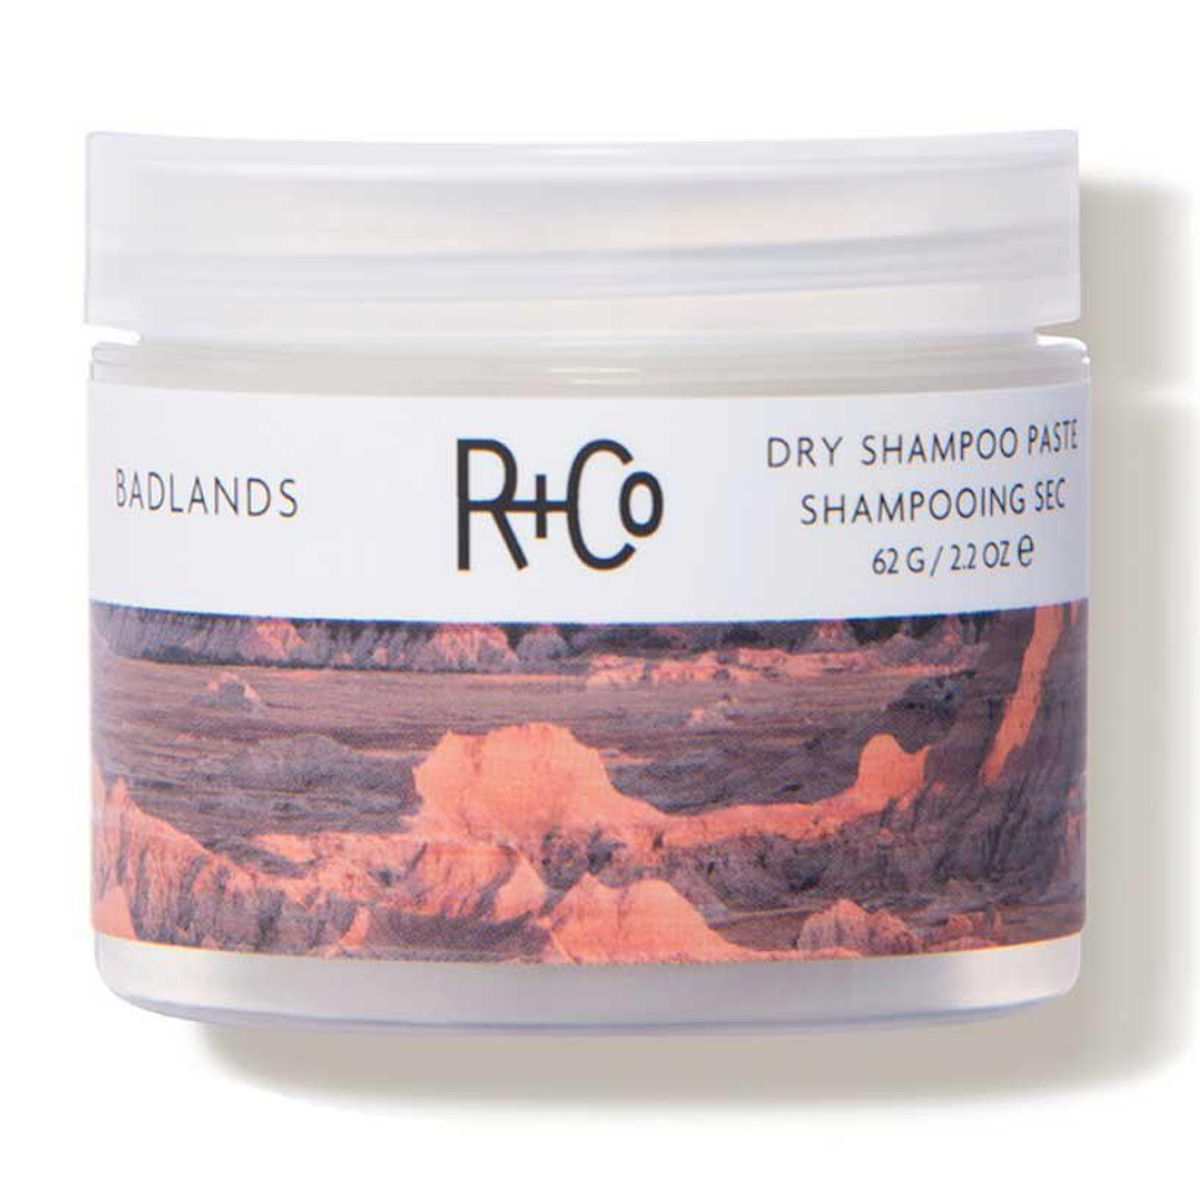 r and co badlands dry shampoo paste